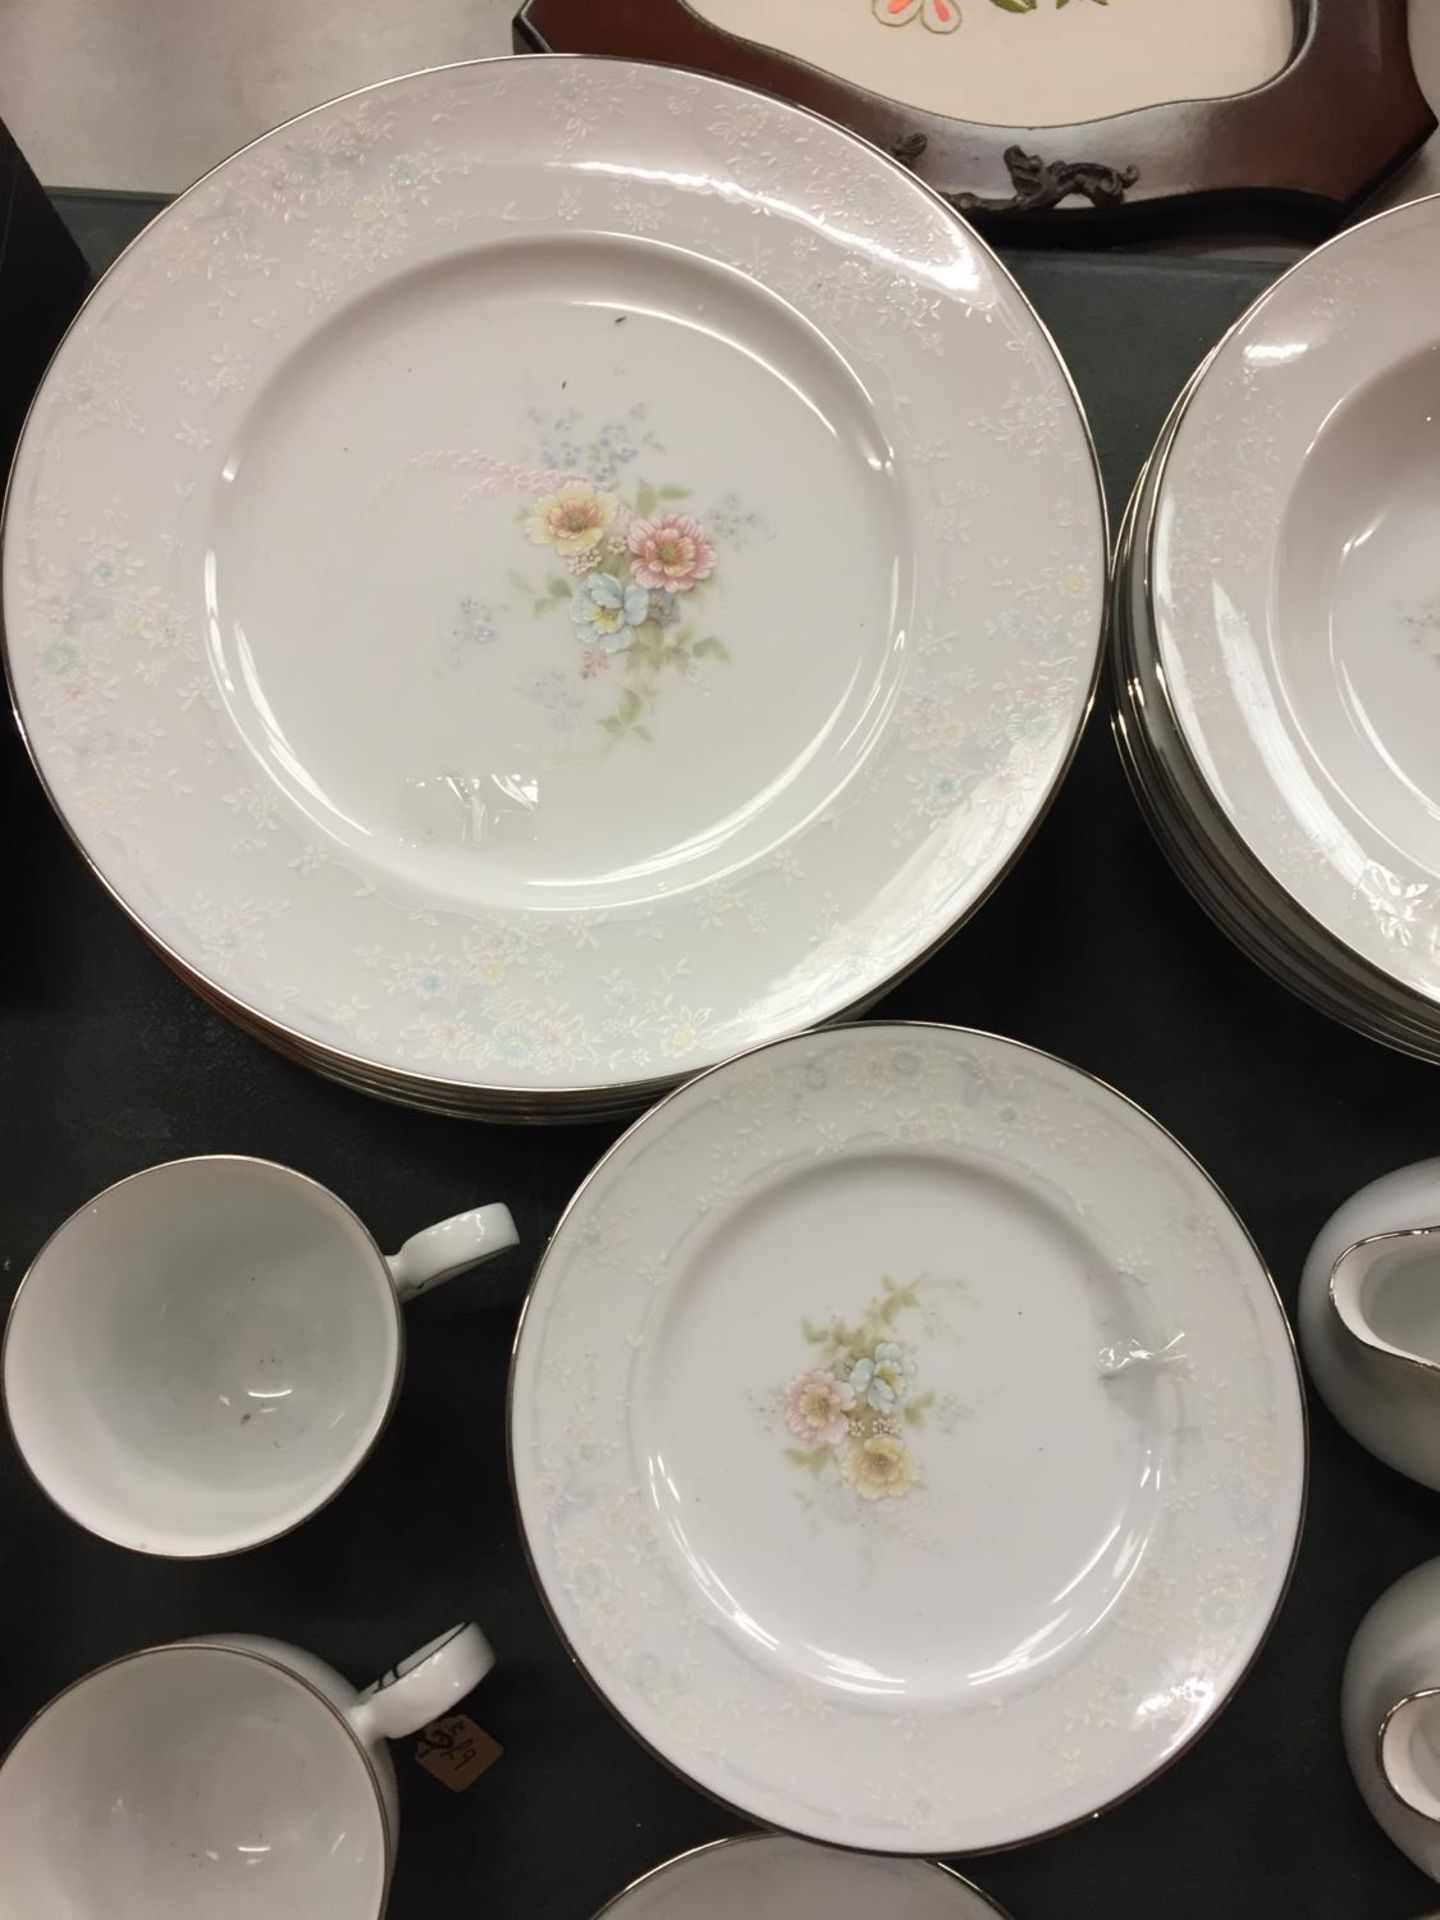 A LARGE COLLECTION OF NORITAKE IRELAND CHINA DINNER WARE IN THE ANTICIPATION DESIGN - Image 4 of 5